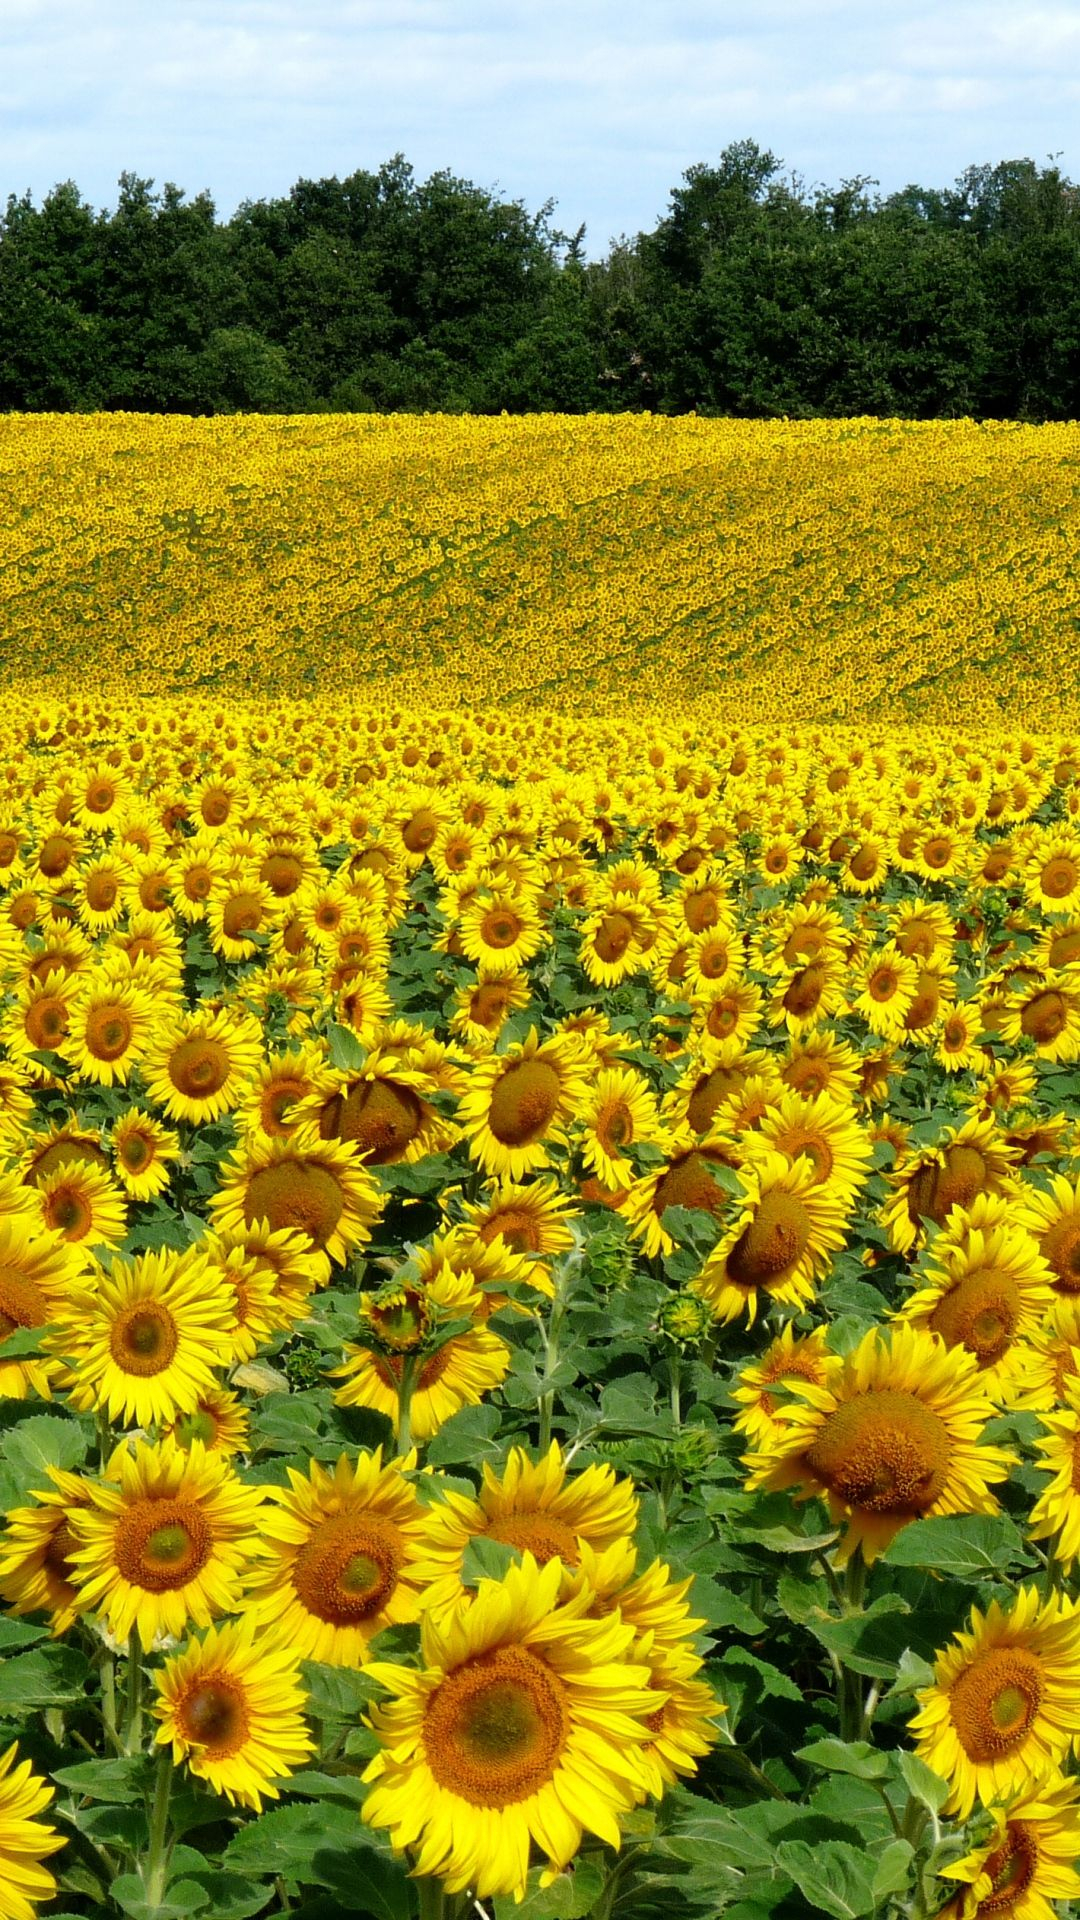 1080x1920 Download Wallpaper Field, Sunflowers, Landscape, Summer Sony Xperia Z1, ZL, Z, Samsung Gala&acirc;&#128;&brvbar; | Sunflower photography, Sunflower fields, Sunflower pictures